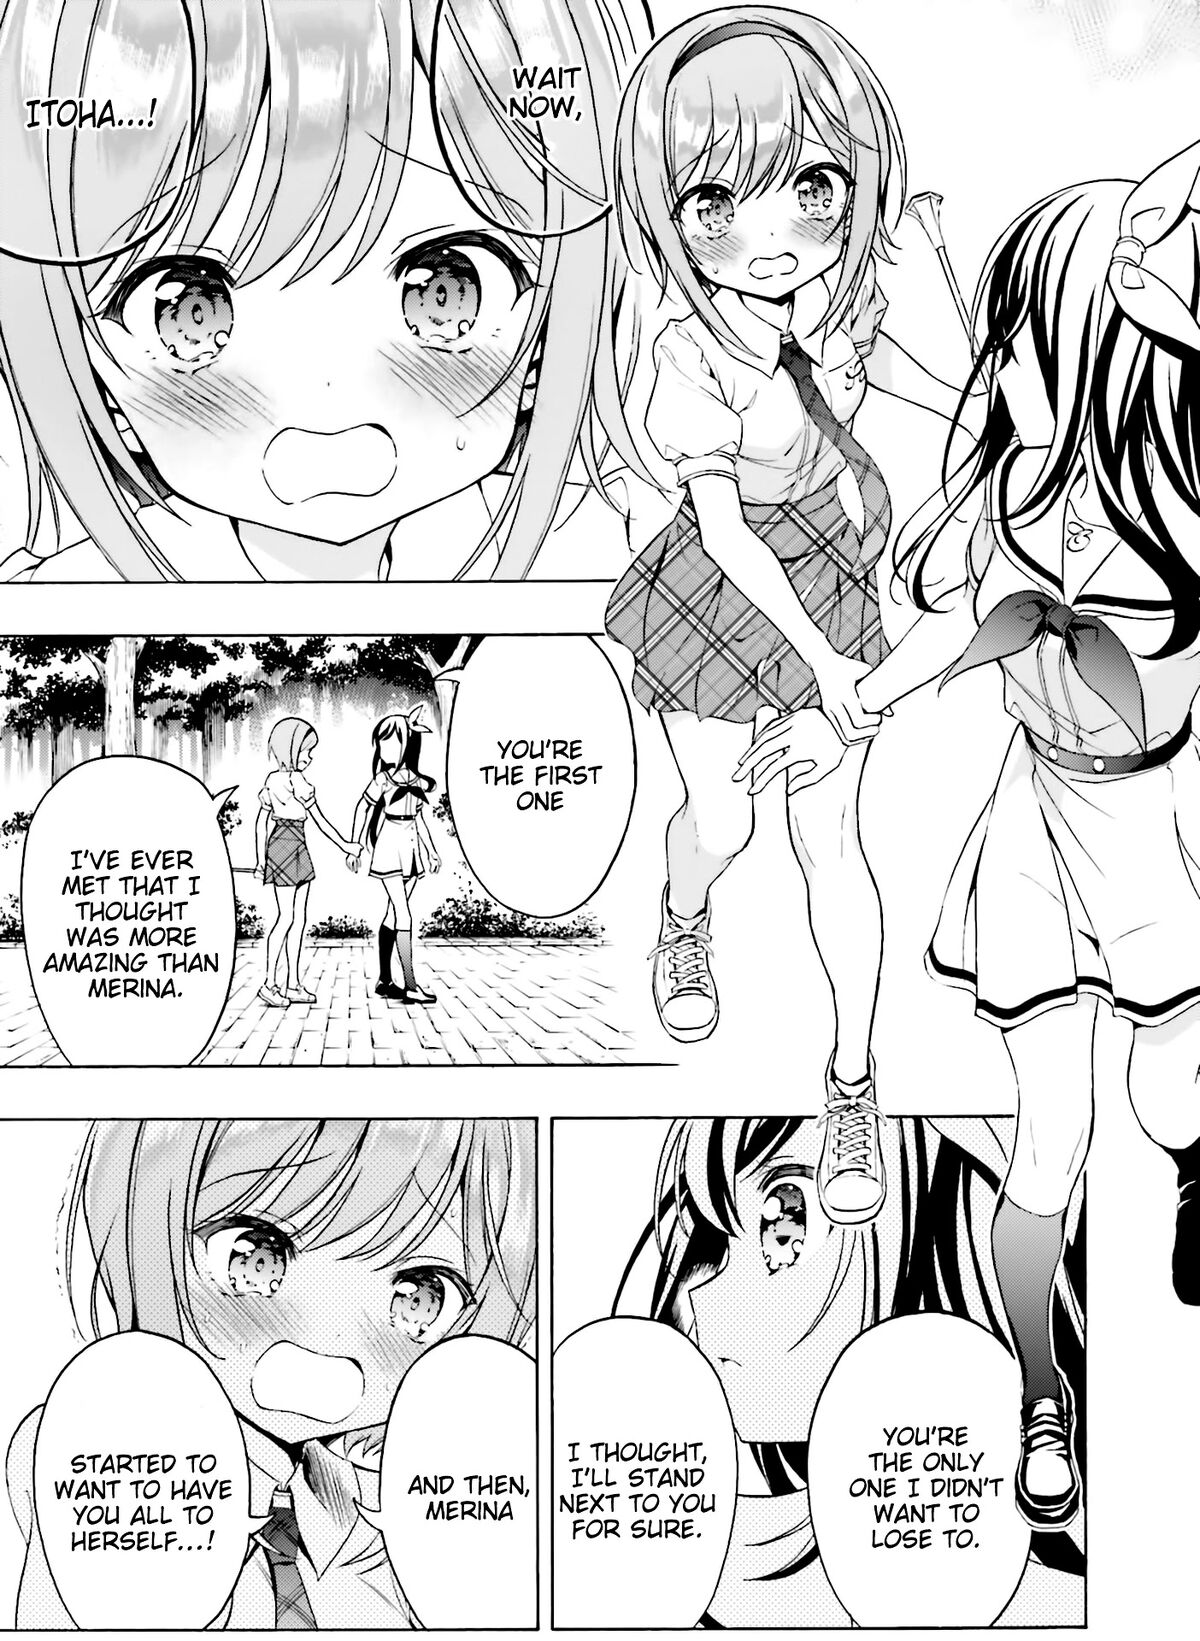 Some thoughts on the incredible Quintessential Quintuplets manga